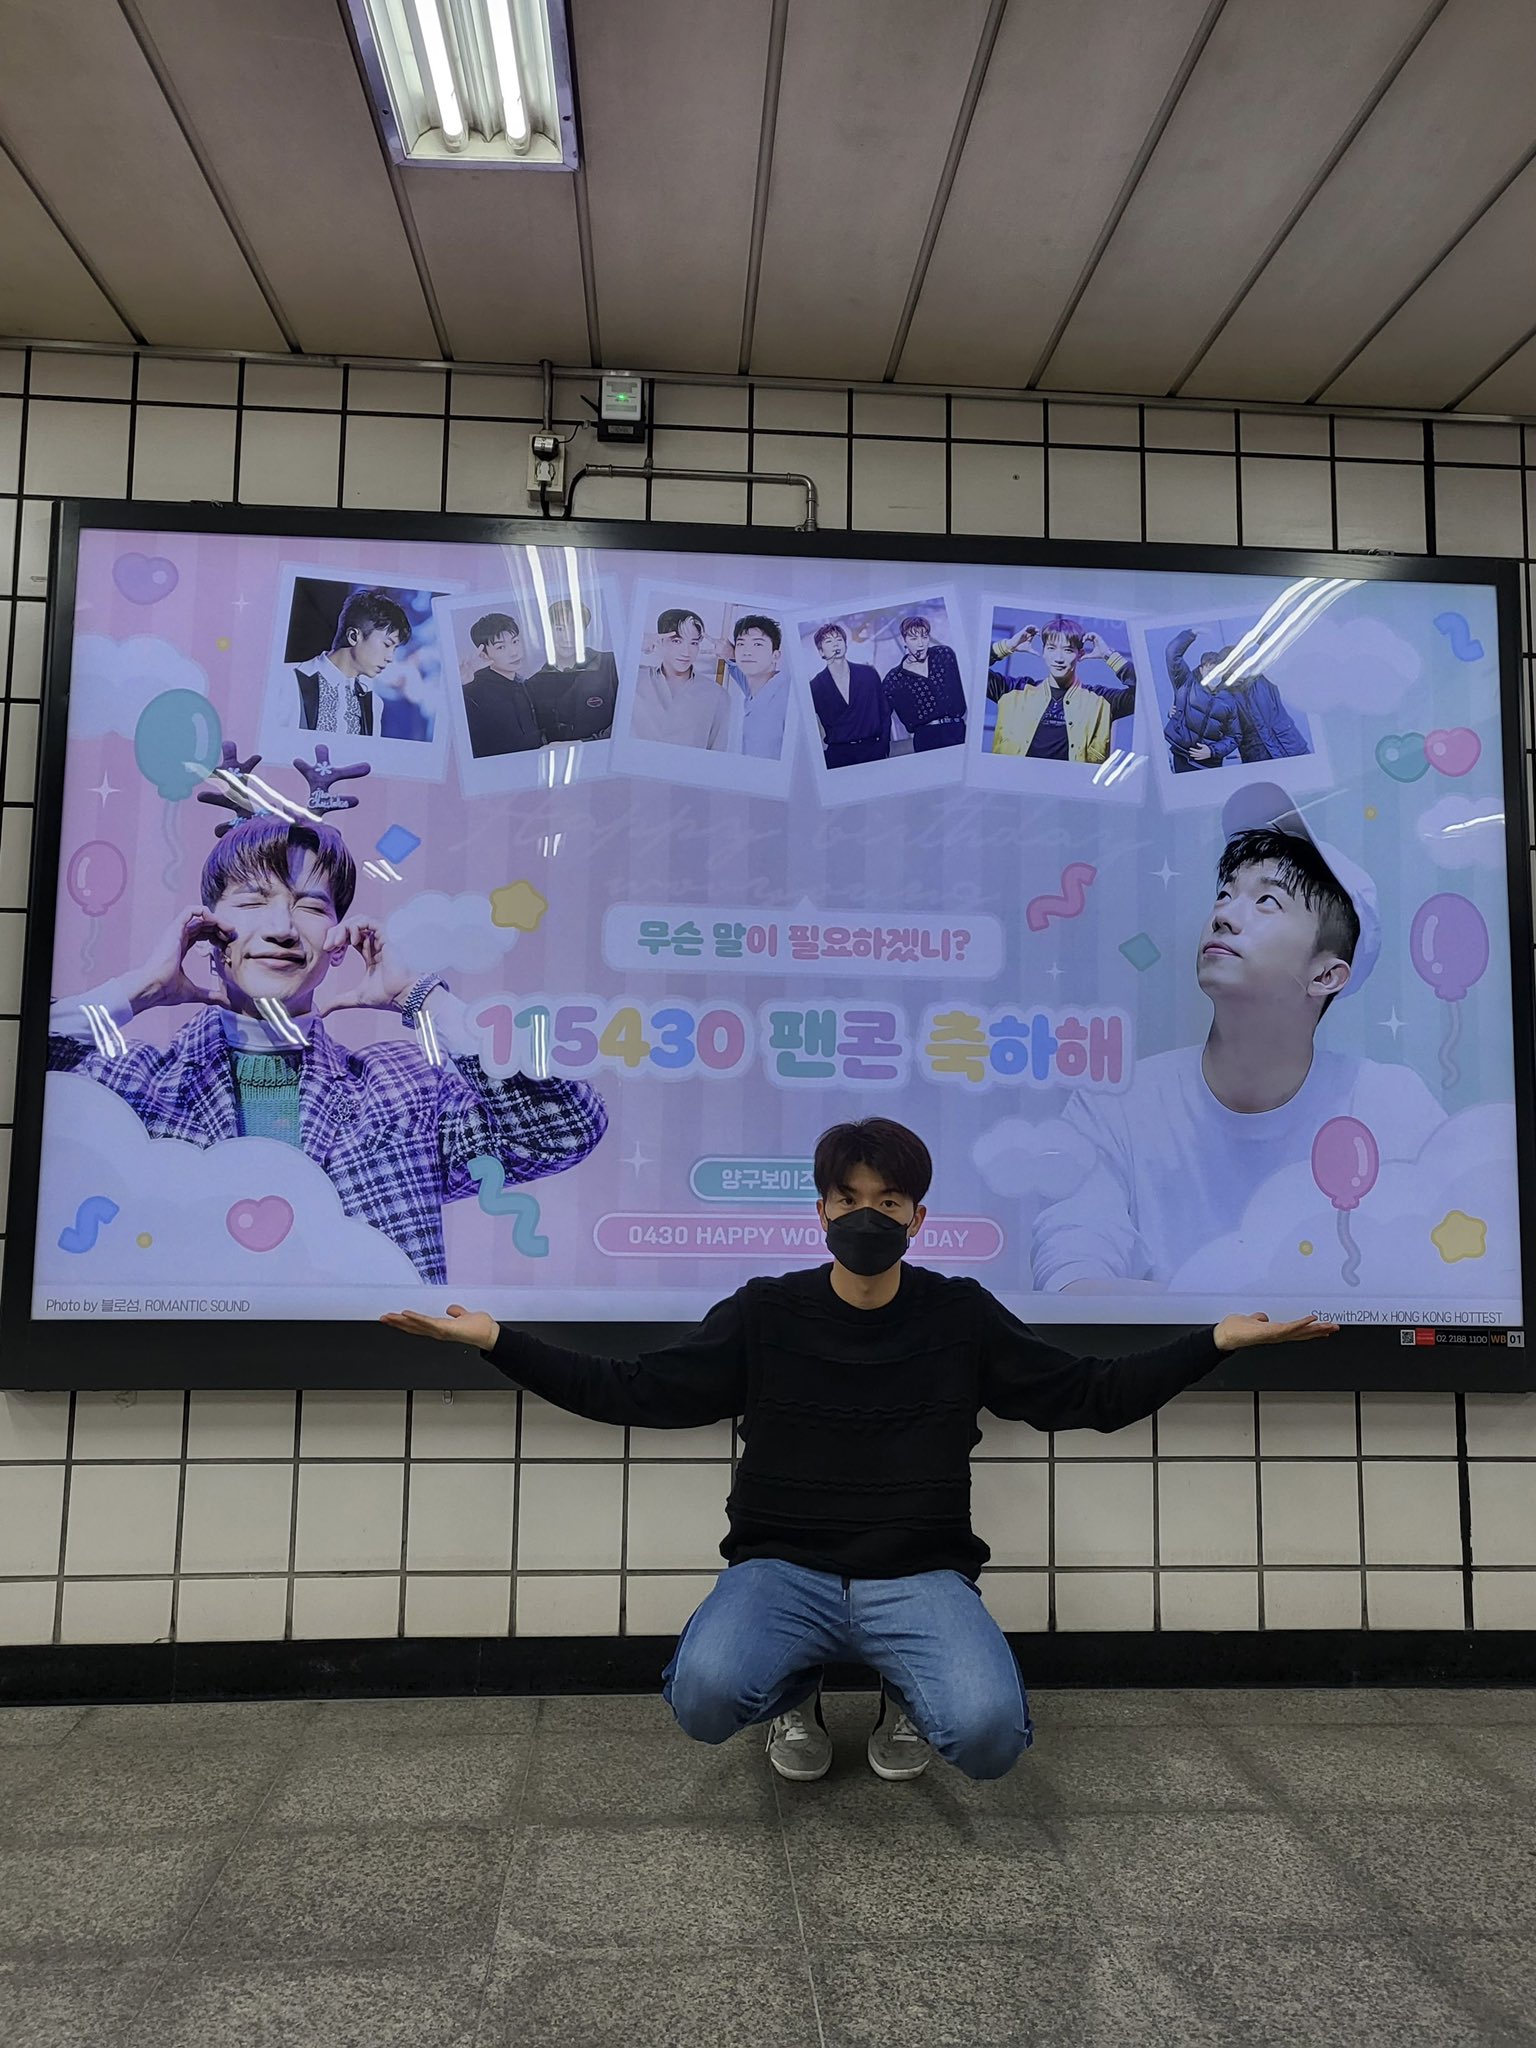 Jang wooyoung came across the fan-con and birthday ad he\s the sweetest   